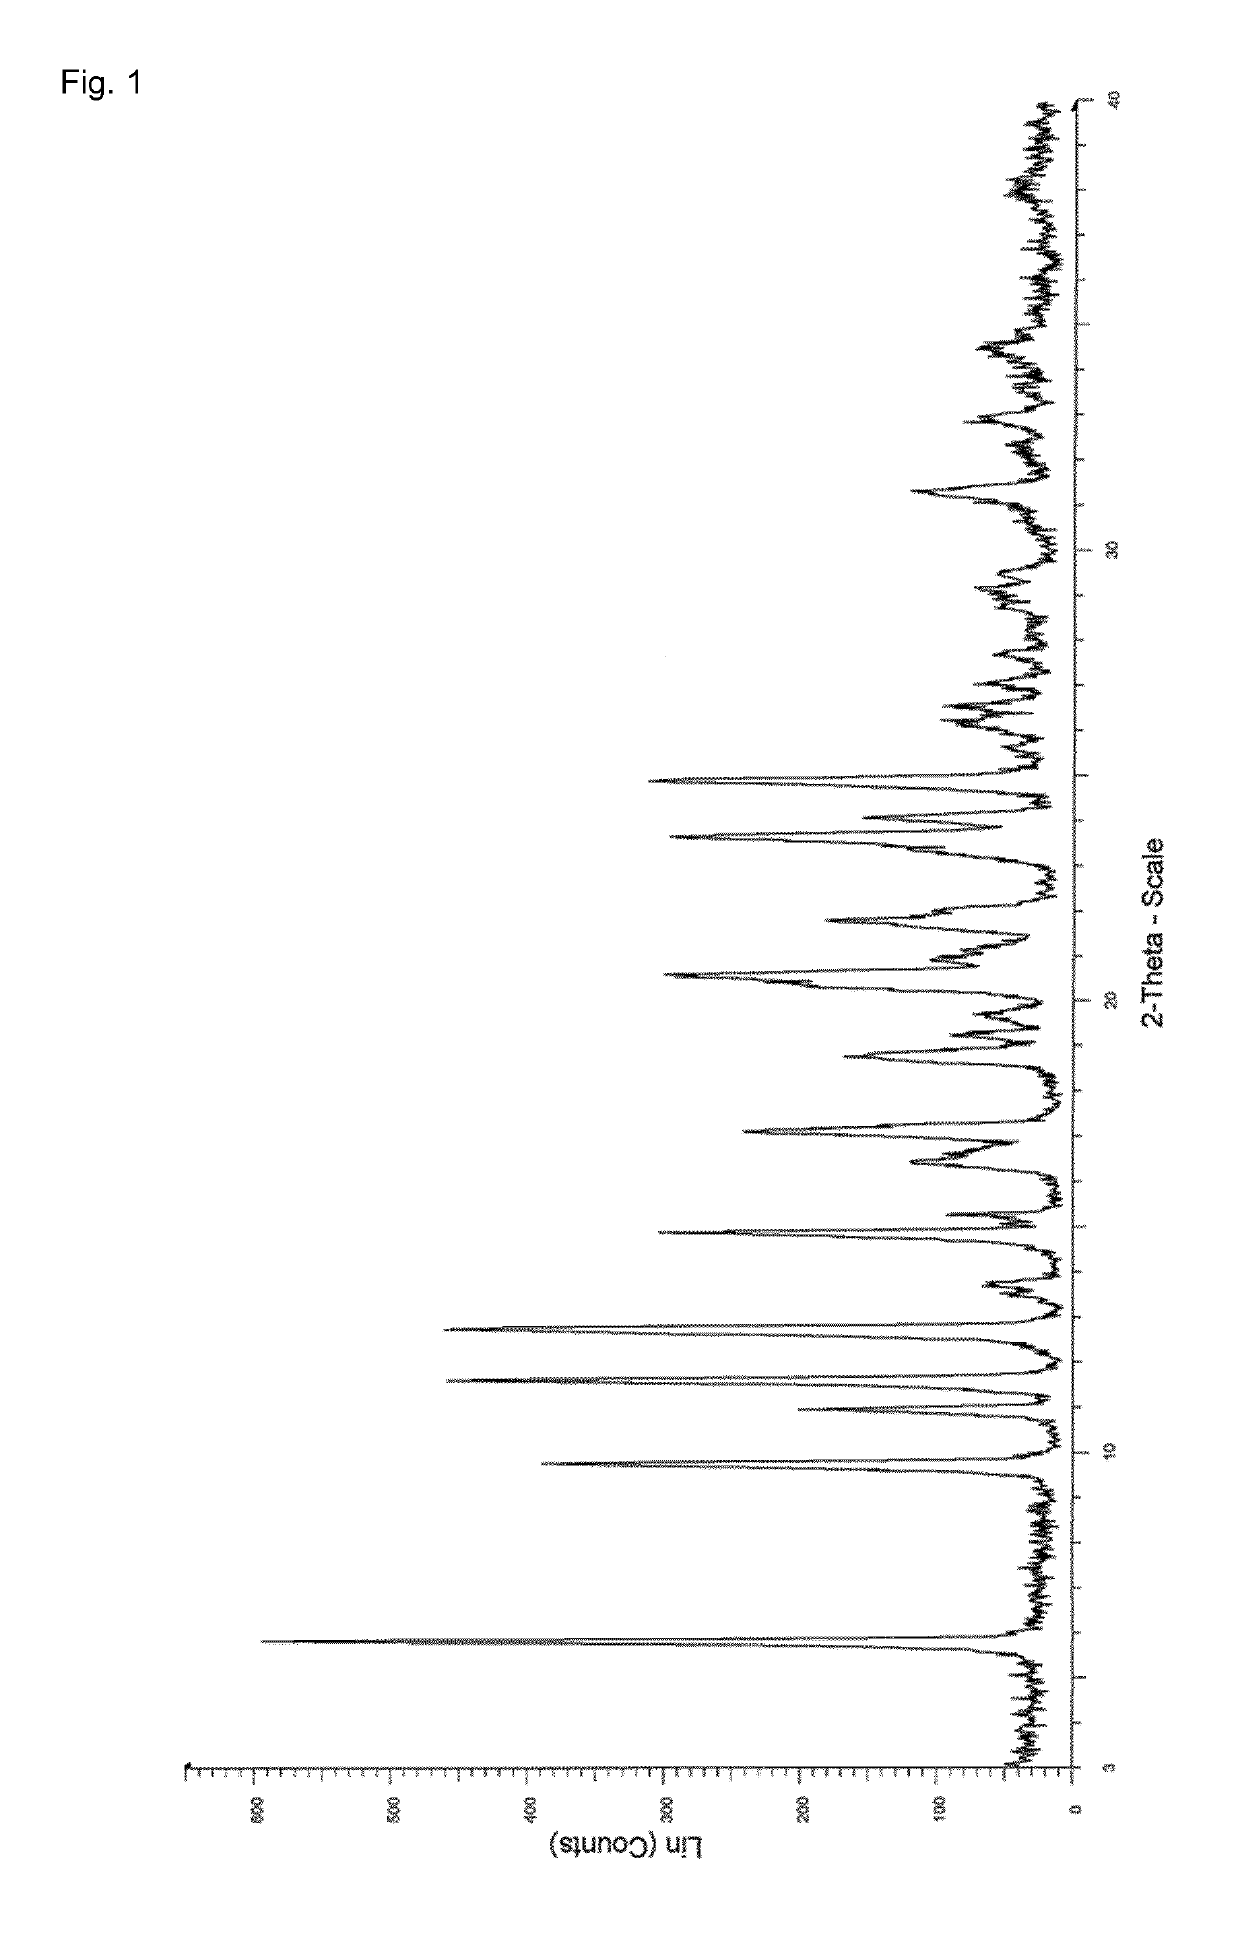 Process for the preparation of enclomiphene citrate having needle shaped crystal habit